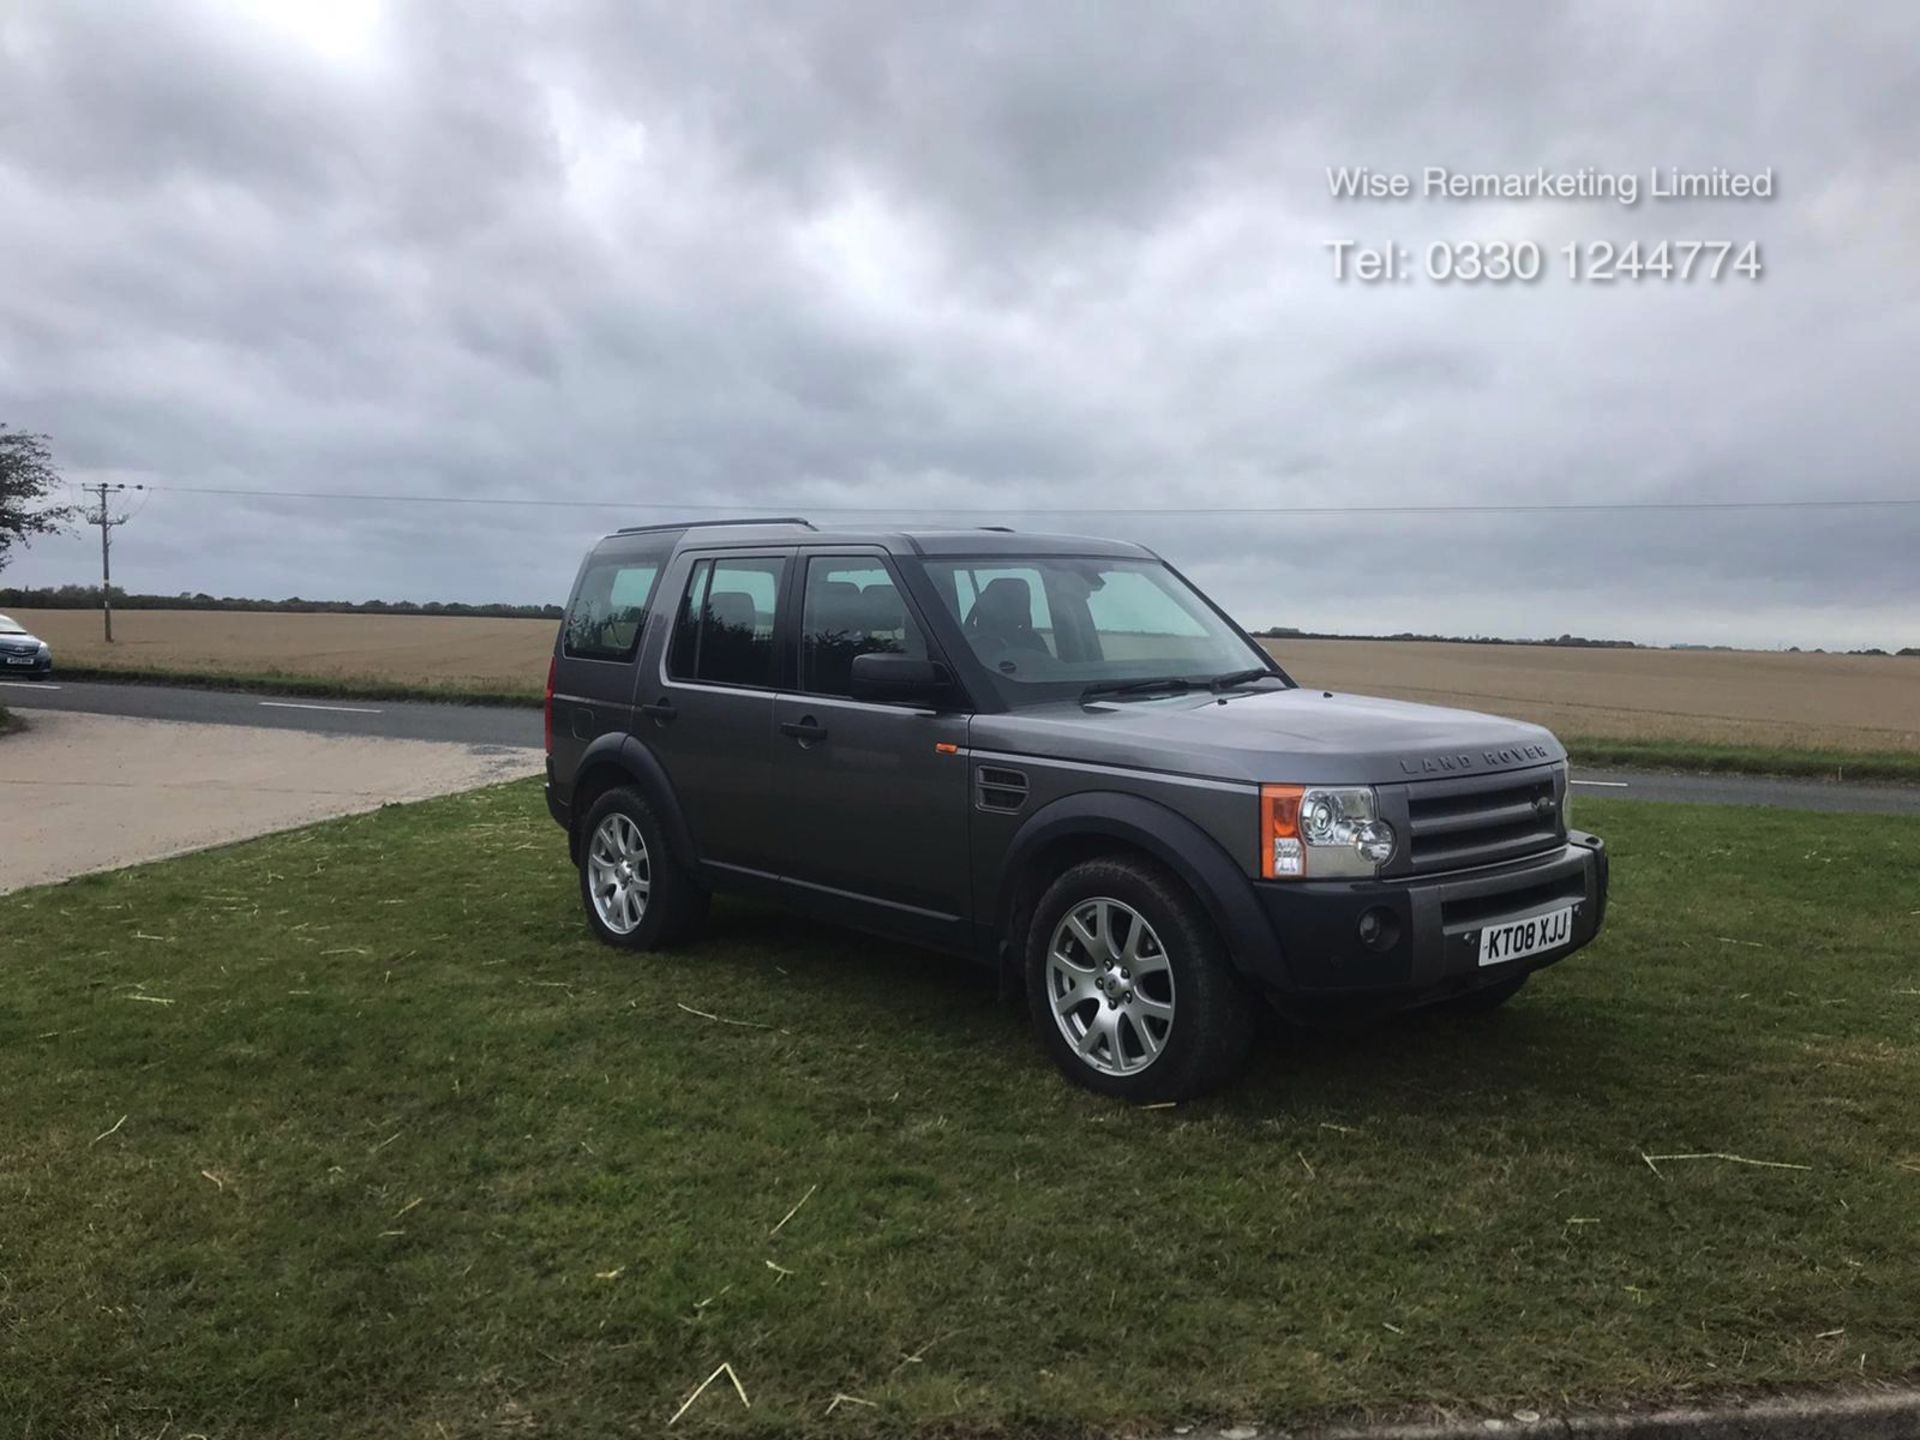 Land Rover Discovery 2.7 TD V6 Special Equipment - Auto - 2008 08 Reg - Service History - 4x4 - Image 2 of 19